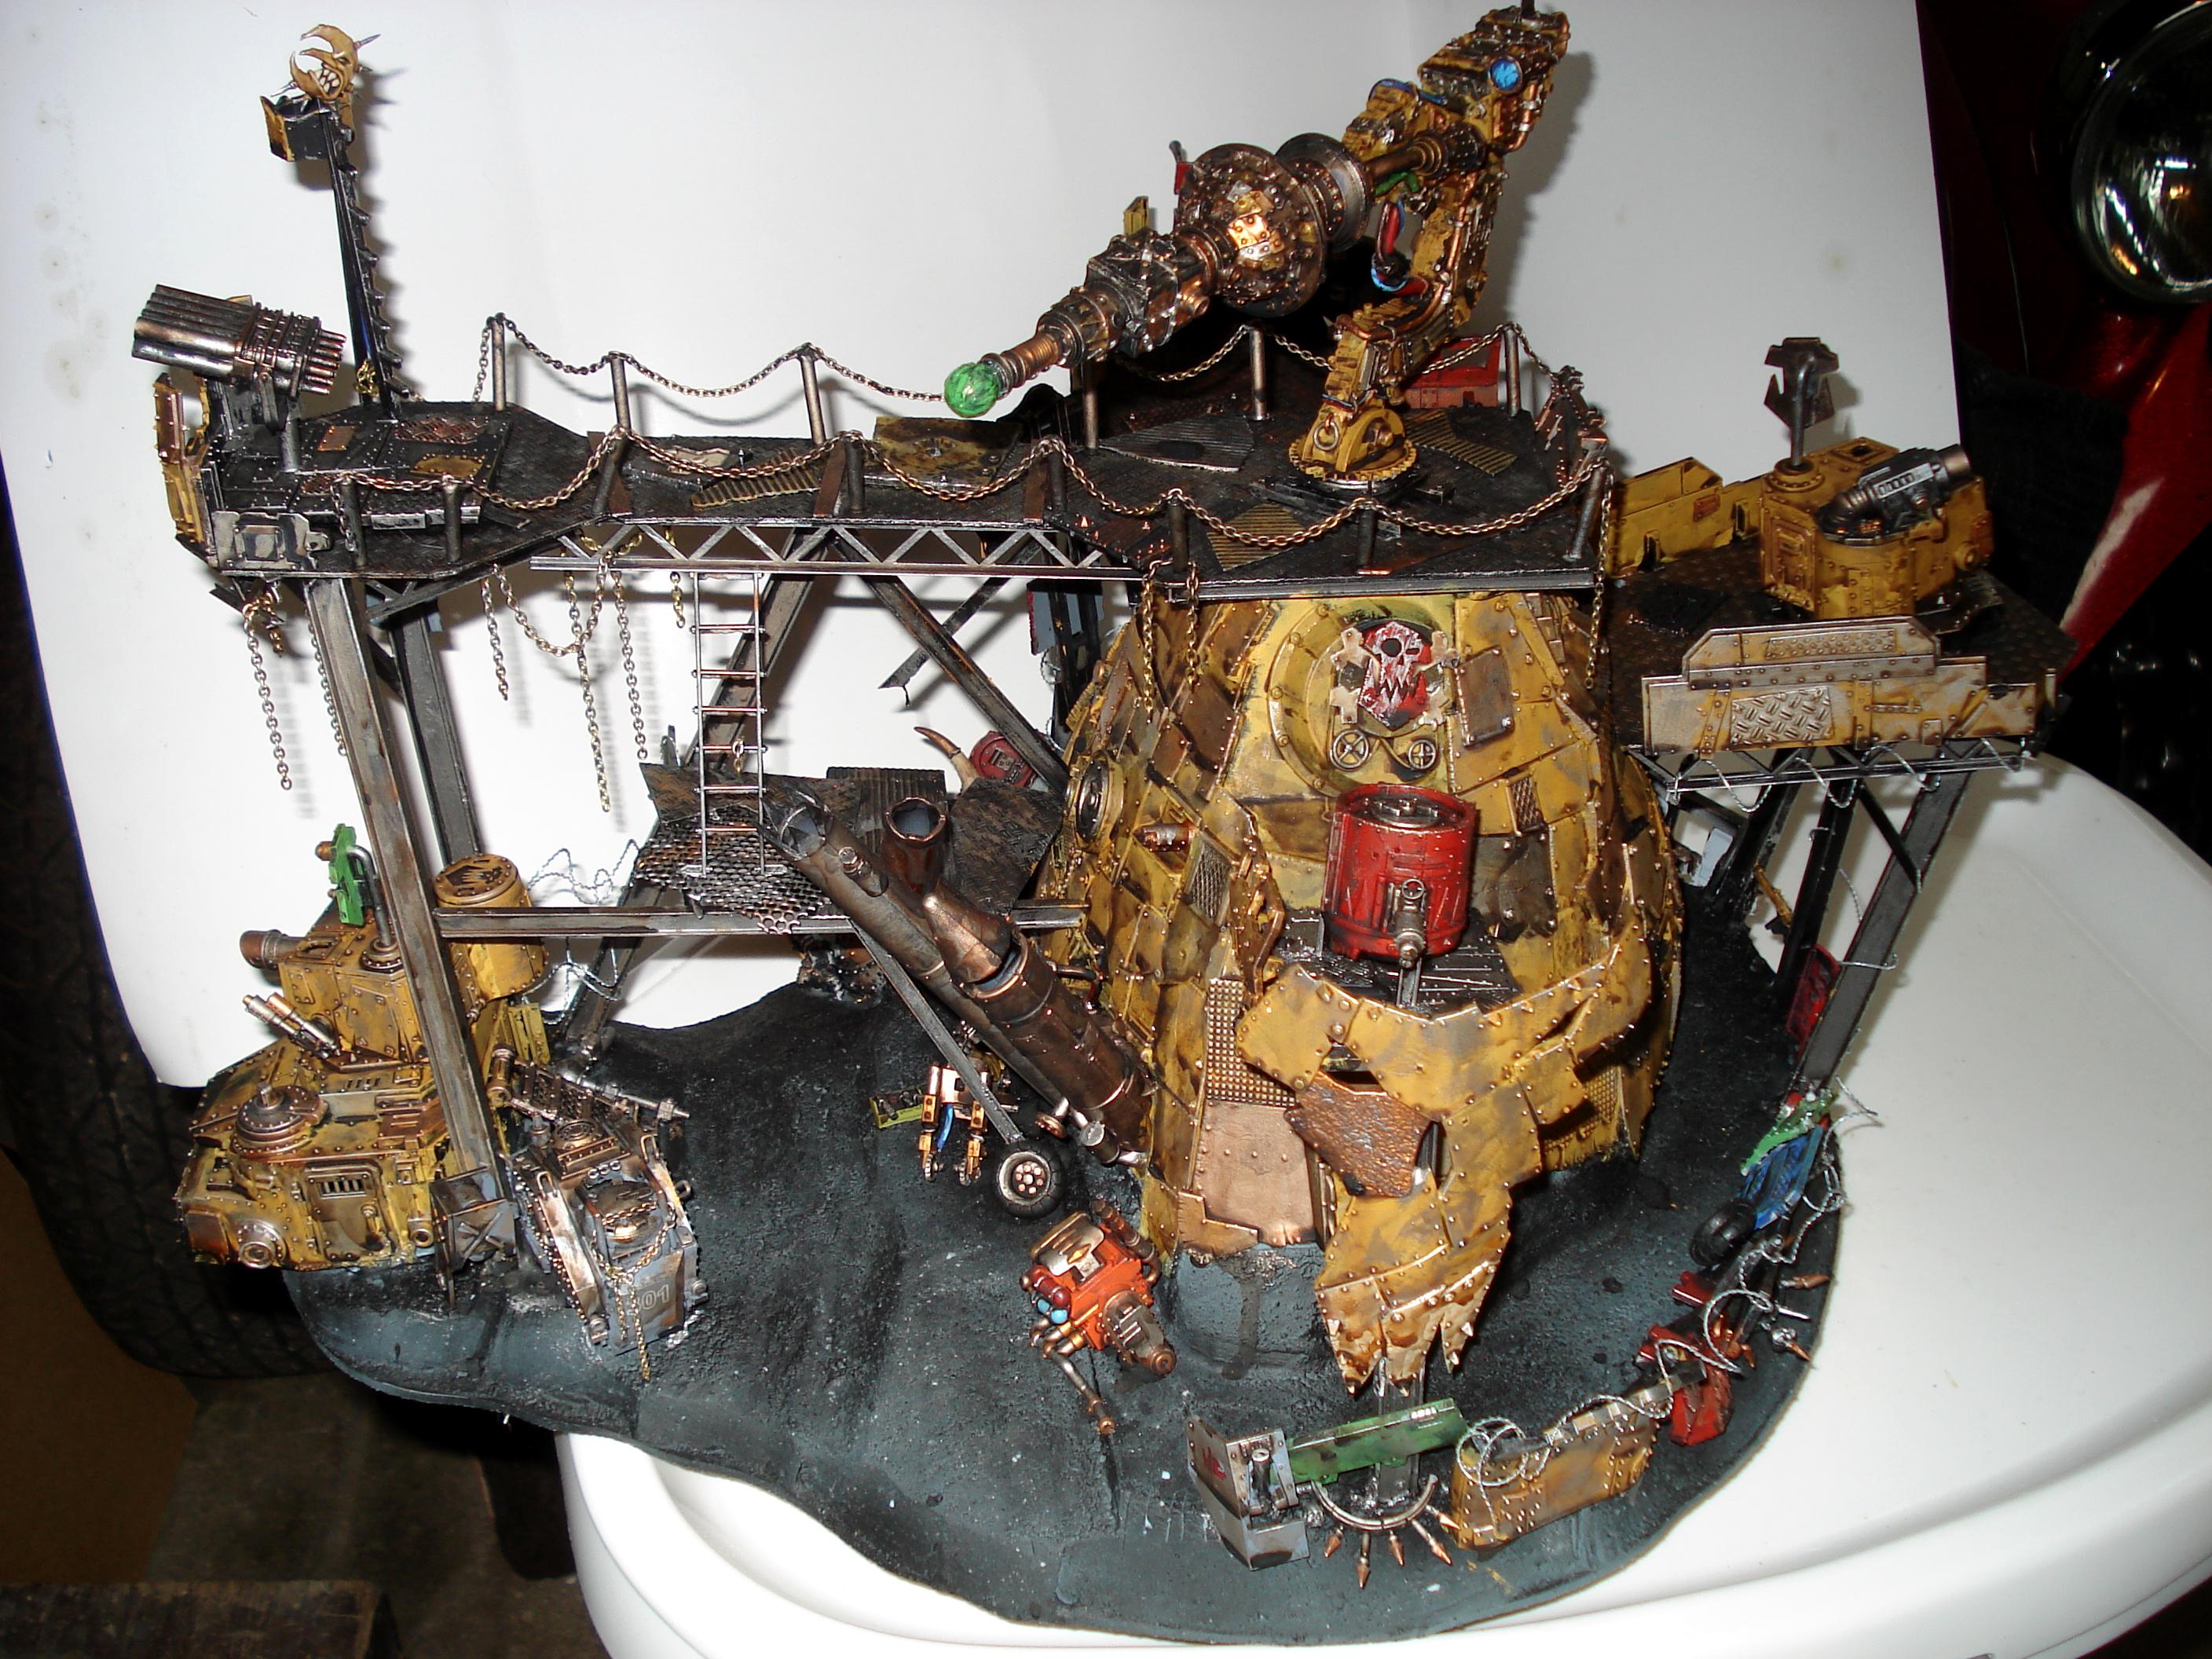 Bad, Claw, Comission, Custom, Deff, Dreadnought, Field, Force, Kustom, Moons, Orks, Scrap, Space, Space Marines, Truk